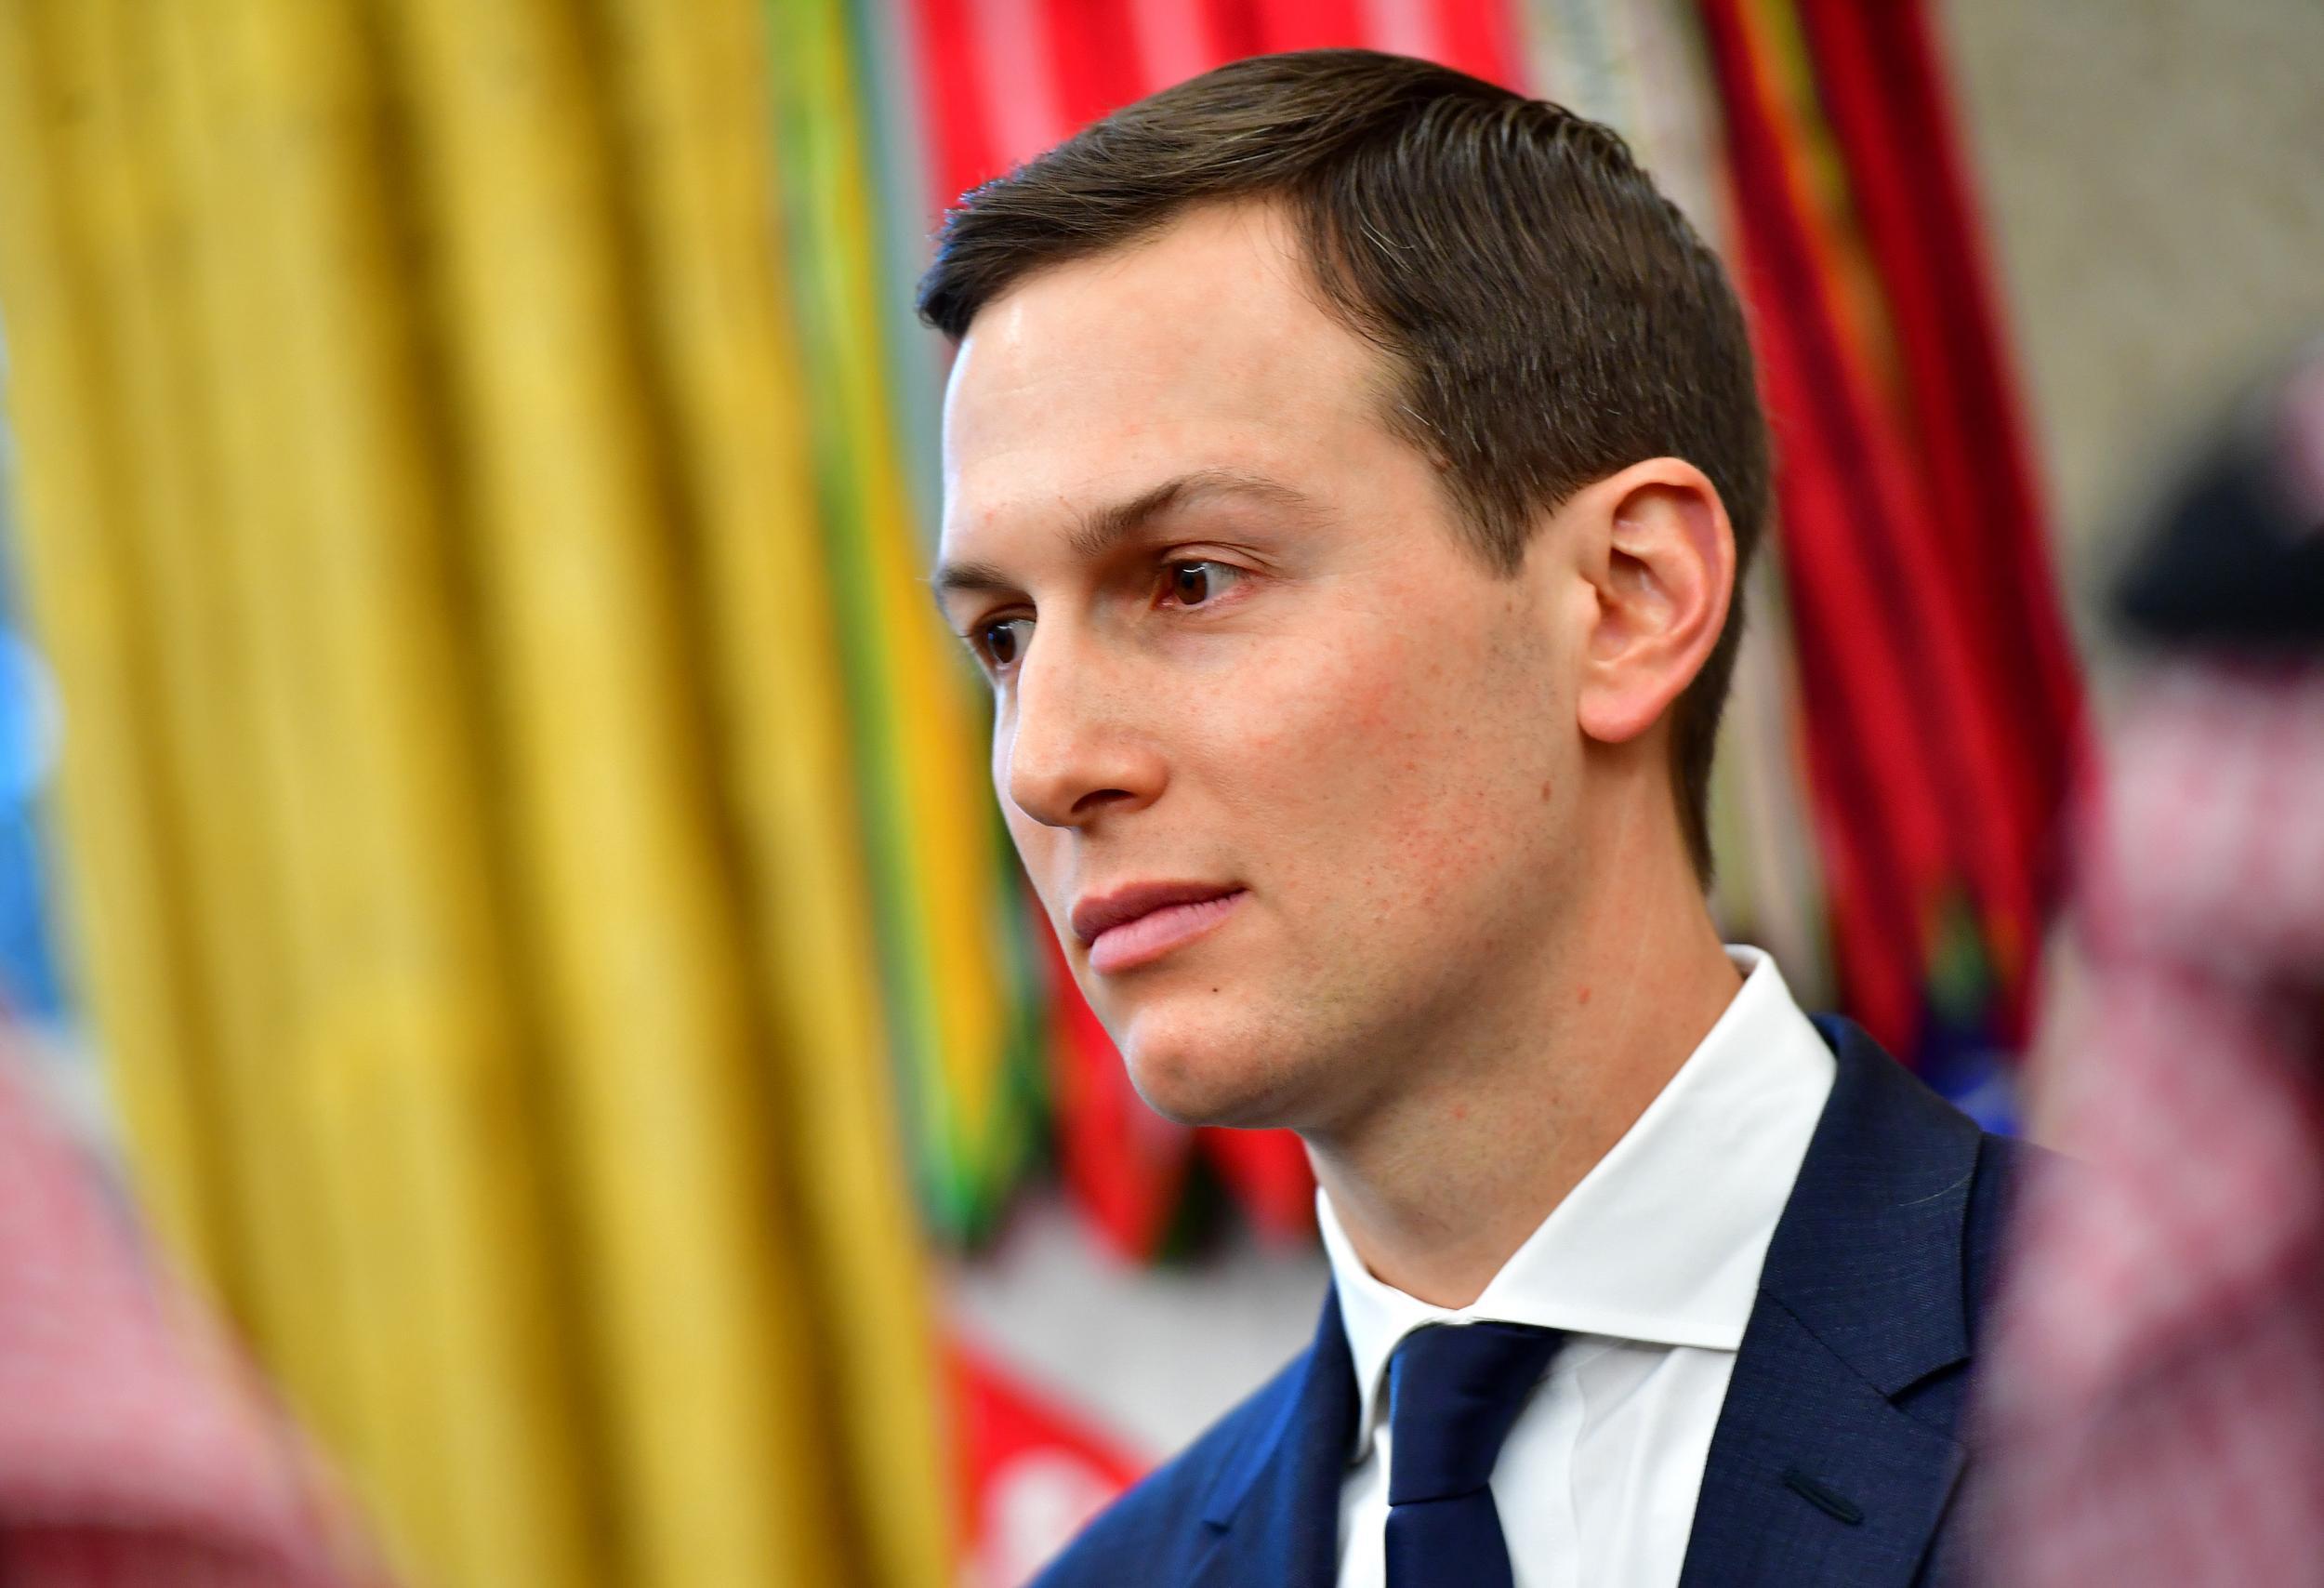 Mr Kushner's security clearance was altered in February